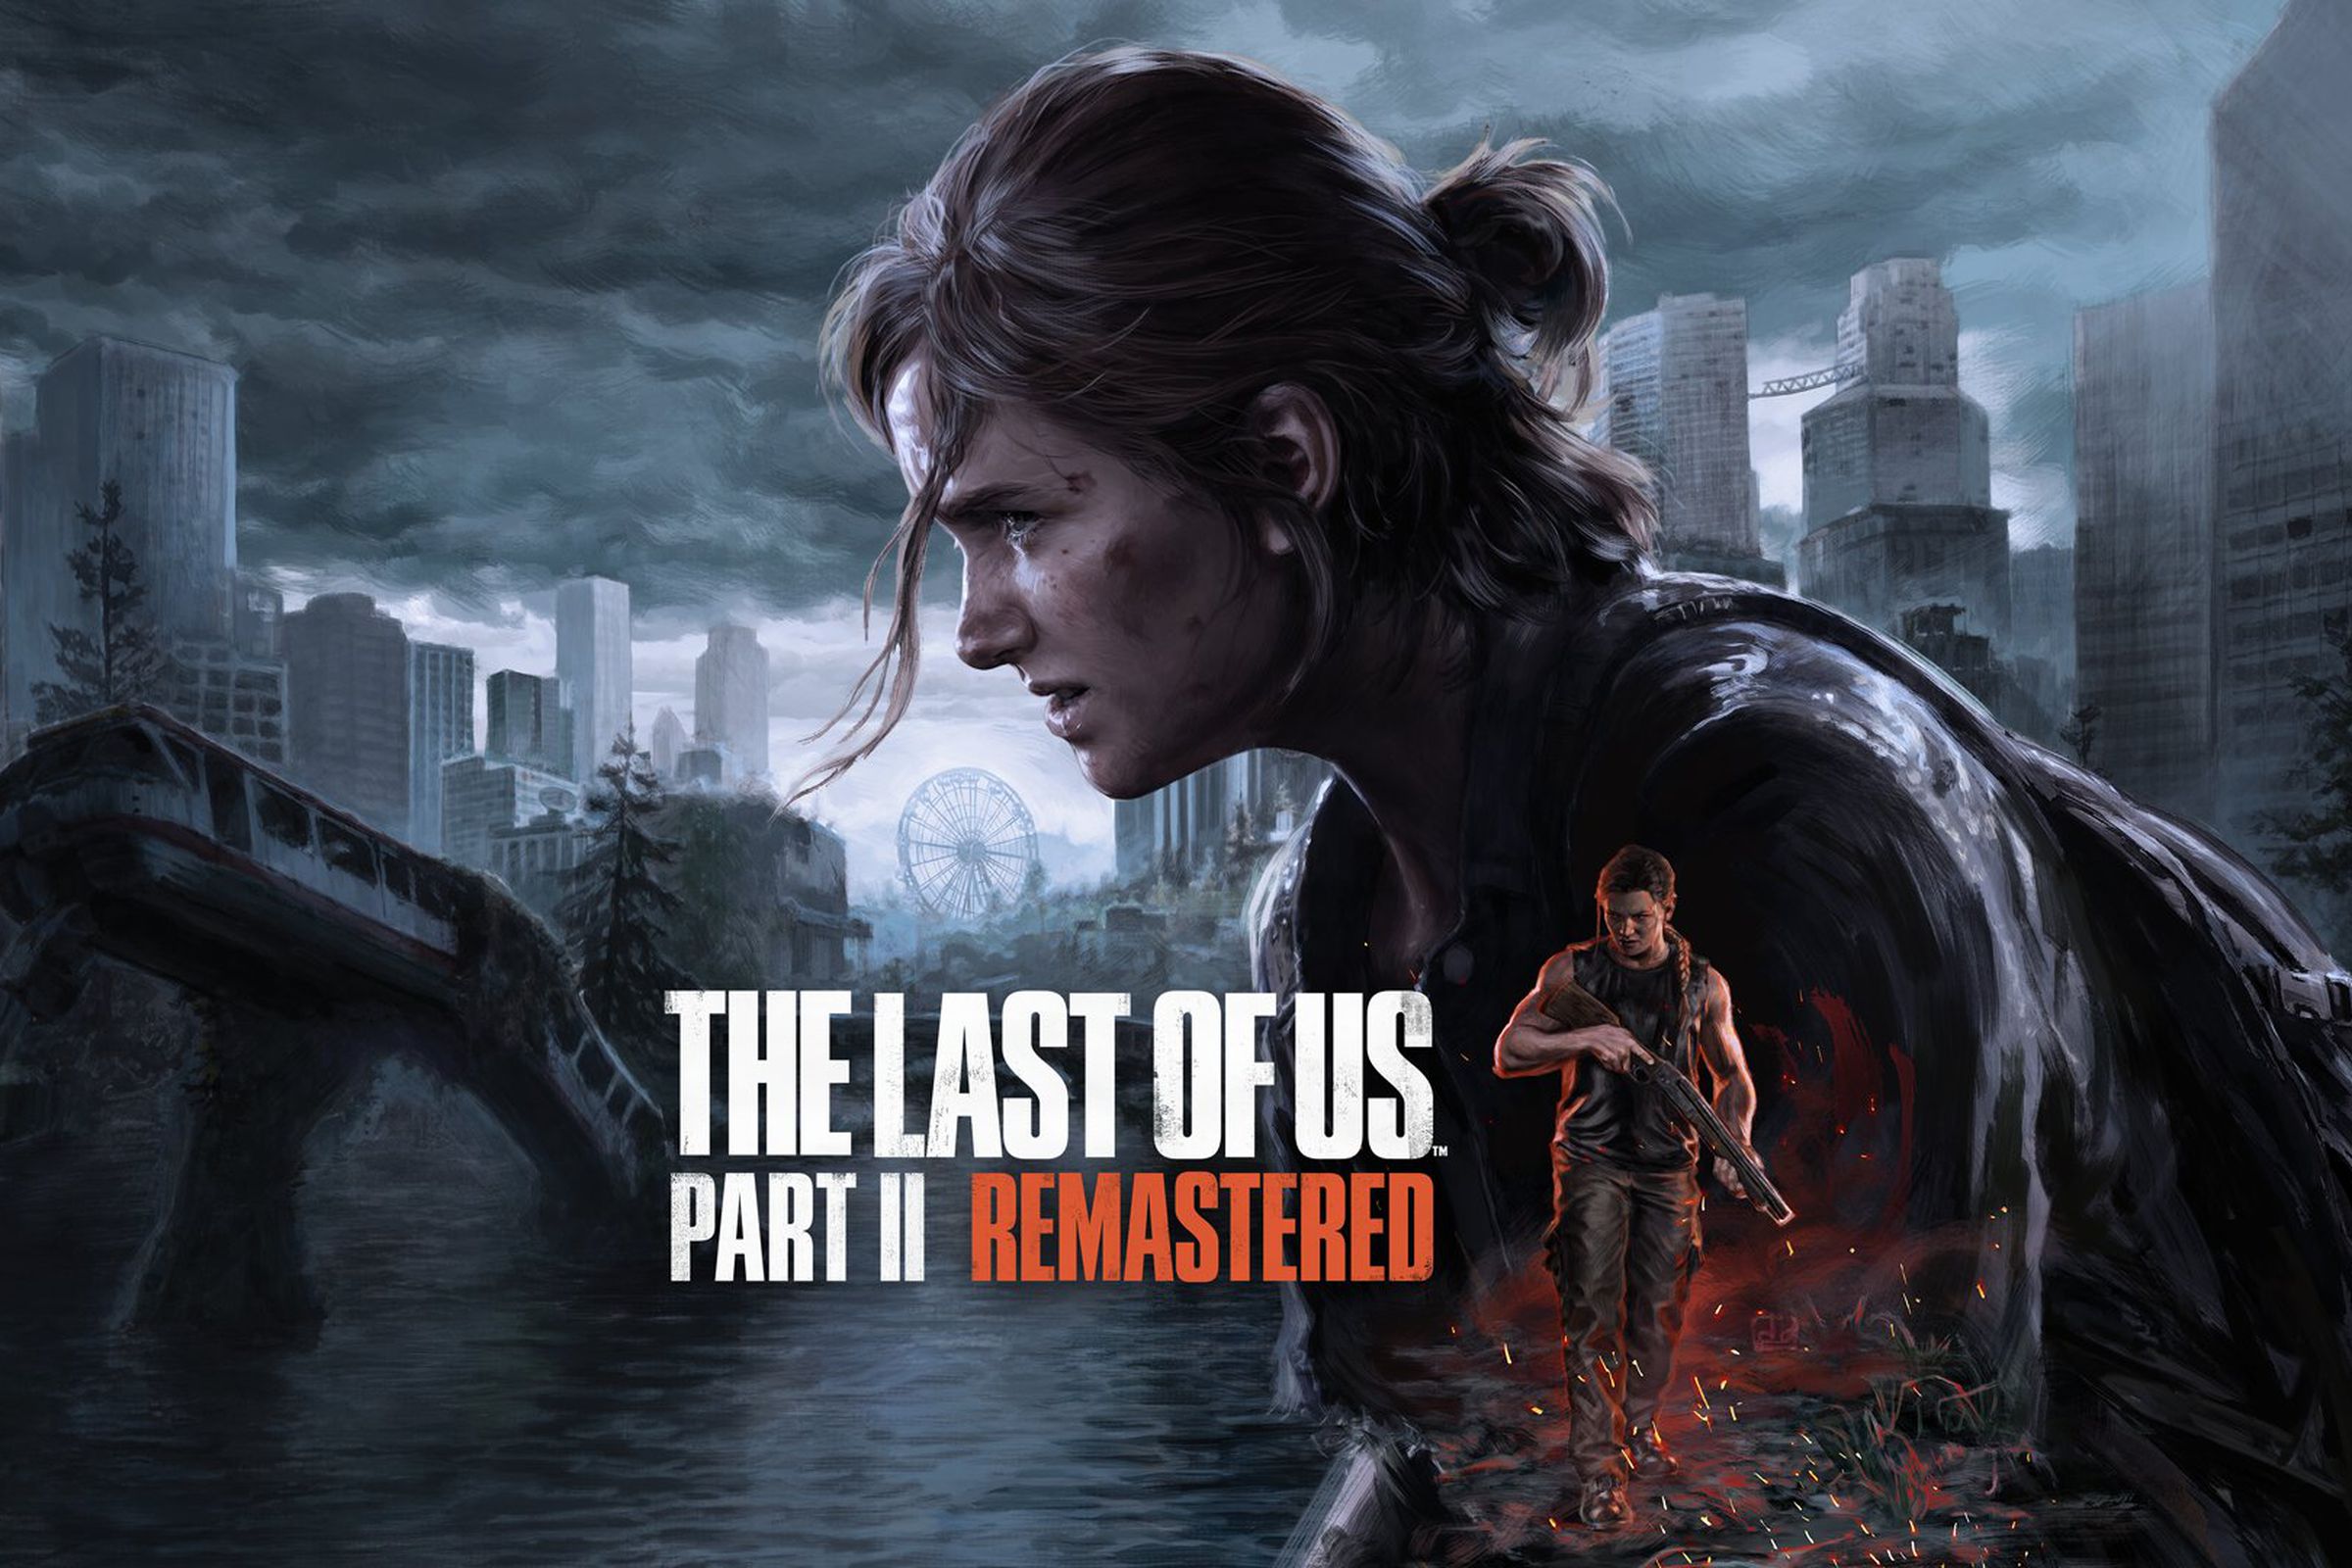 The Last of Us Part II Remastered promotional artwork showing Ellie against a post-apocalyptic background.